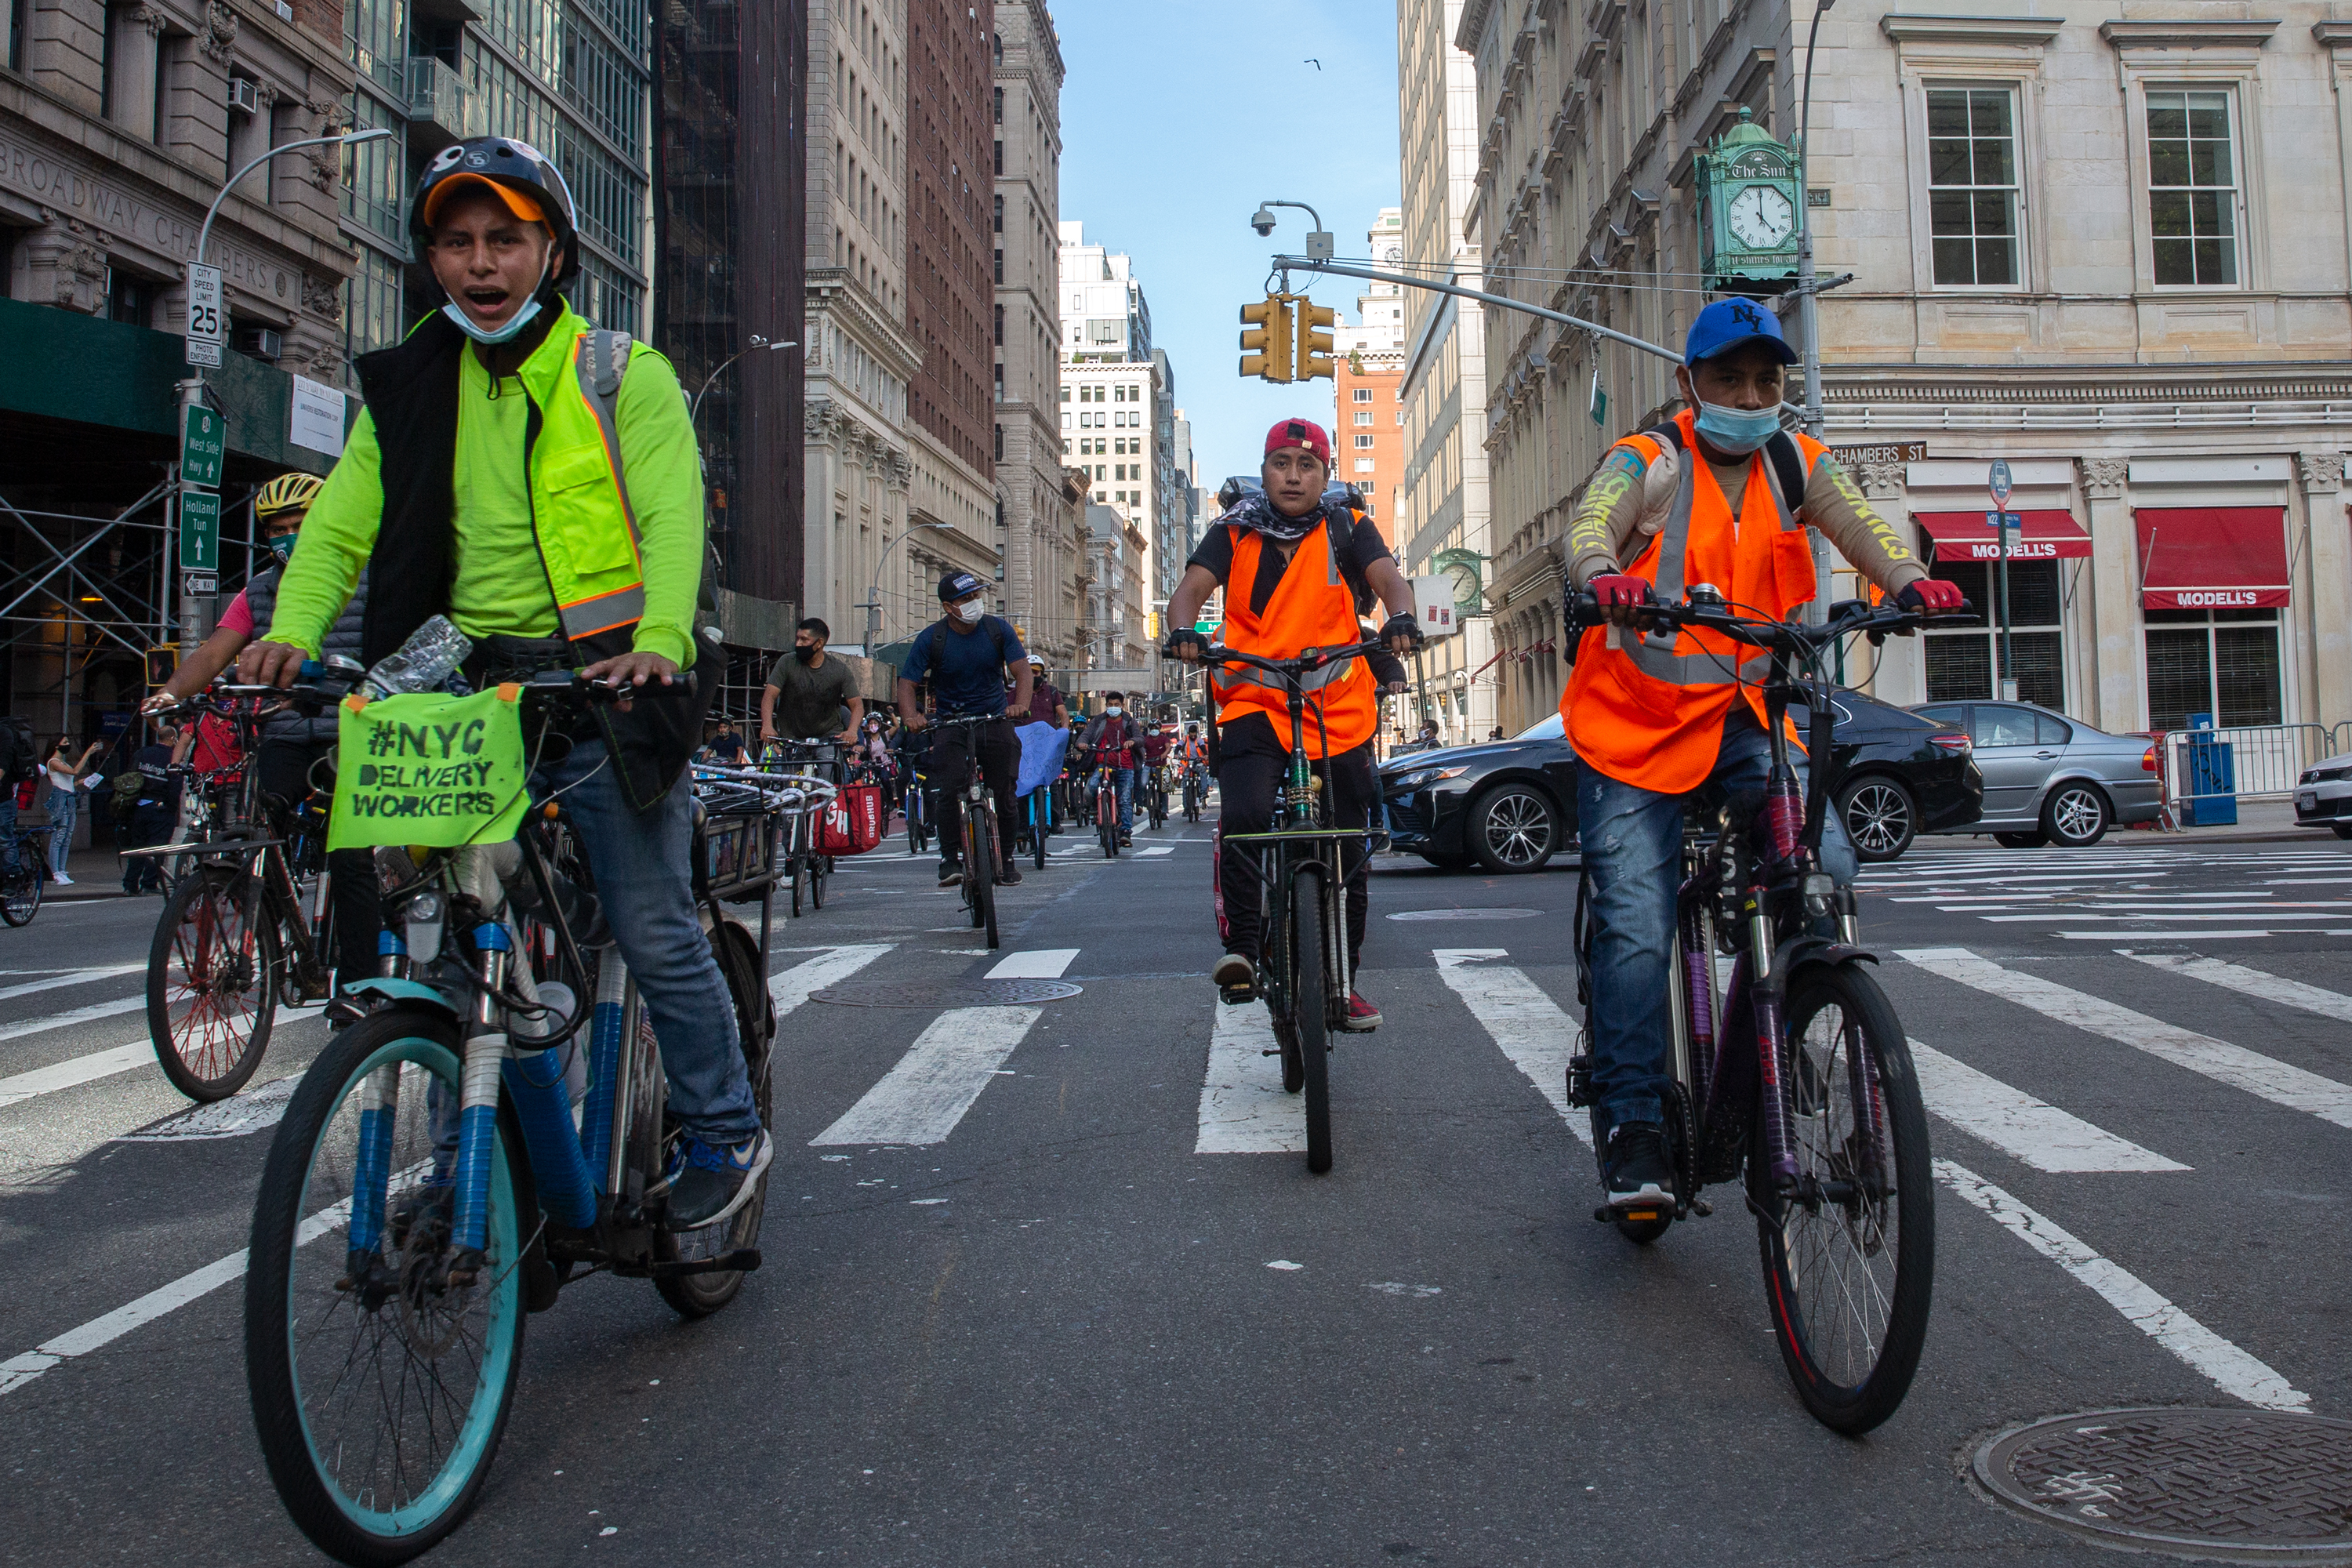 Delivery cyclists ride down Broadway in Manhattan to protest a lack of protection during the coronavirus pandemic, Oct. 15, 2020.